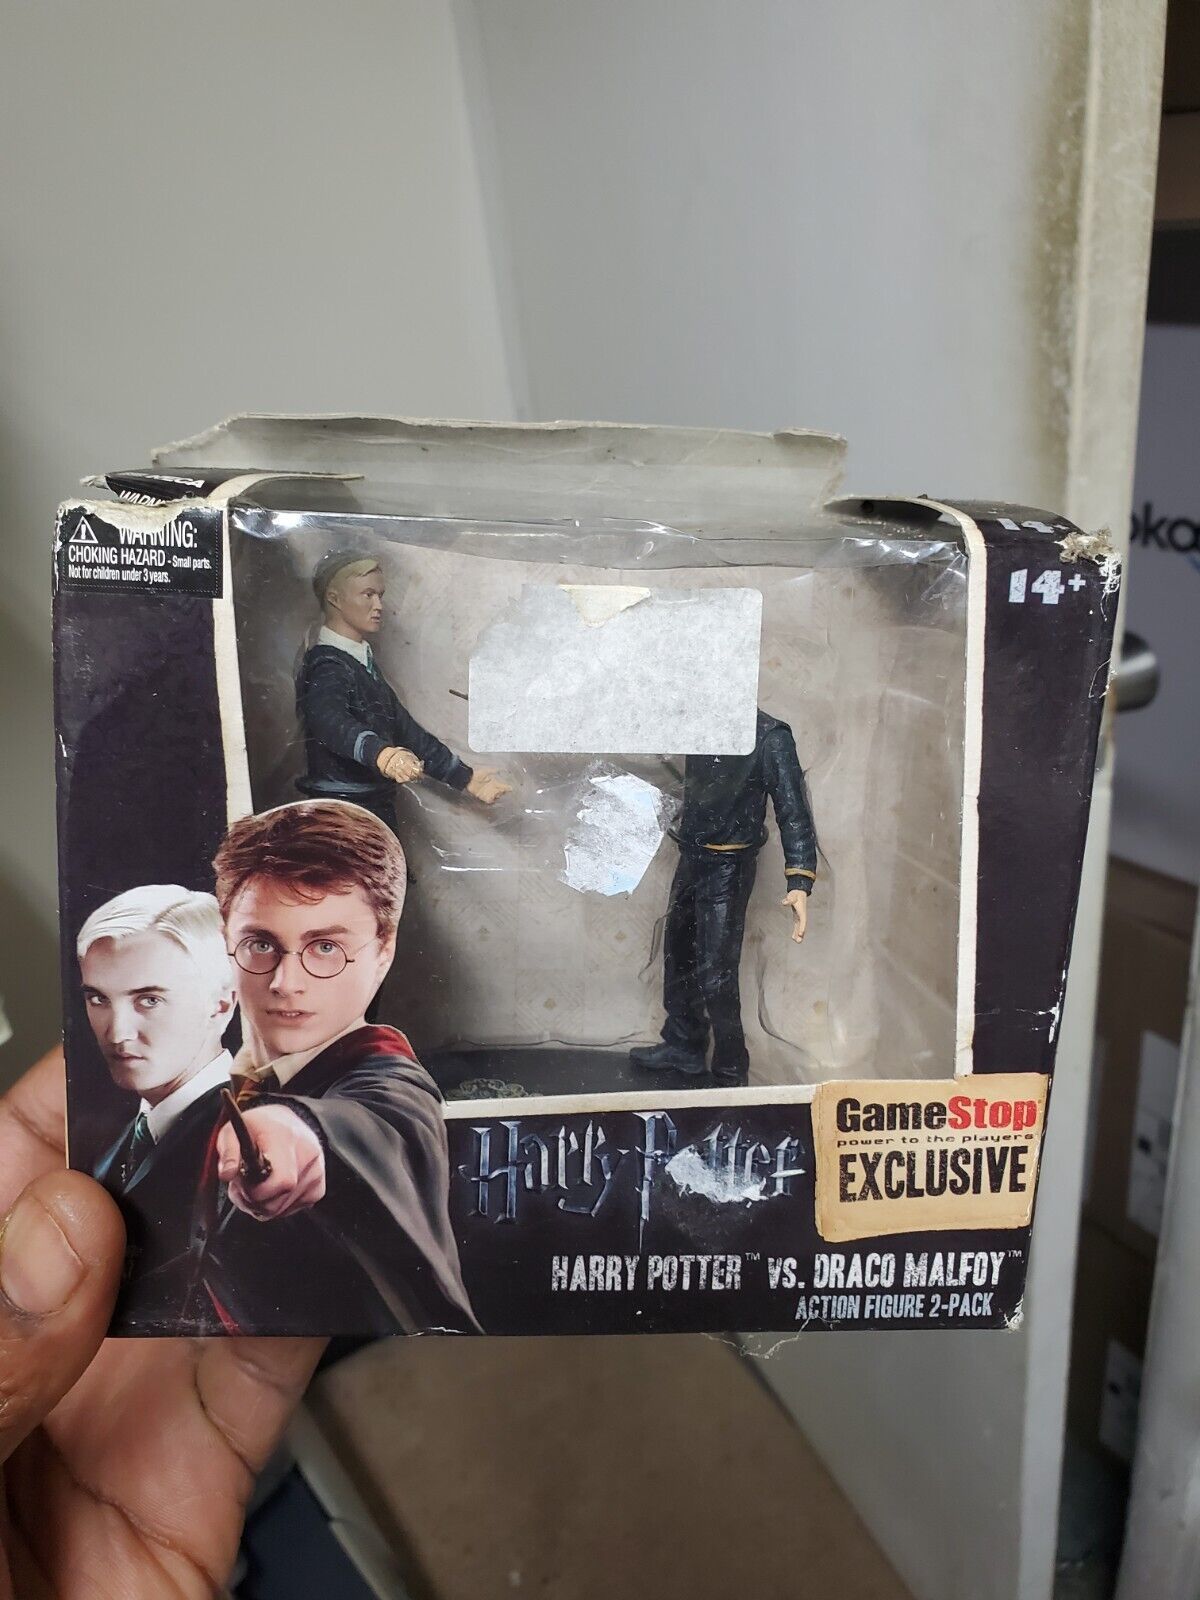 Harry Potter VS Draco Malfoy Action Figure 2 Pack GameStop Exclusive Neca - £21.49 GBP